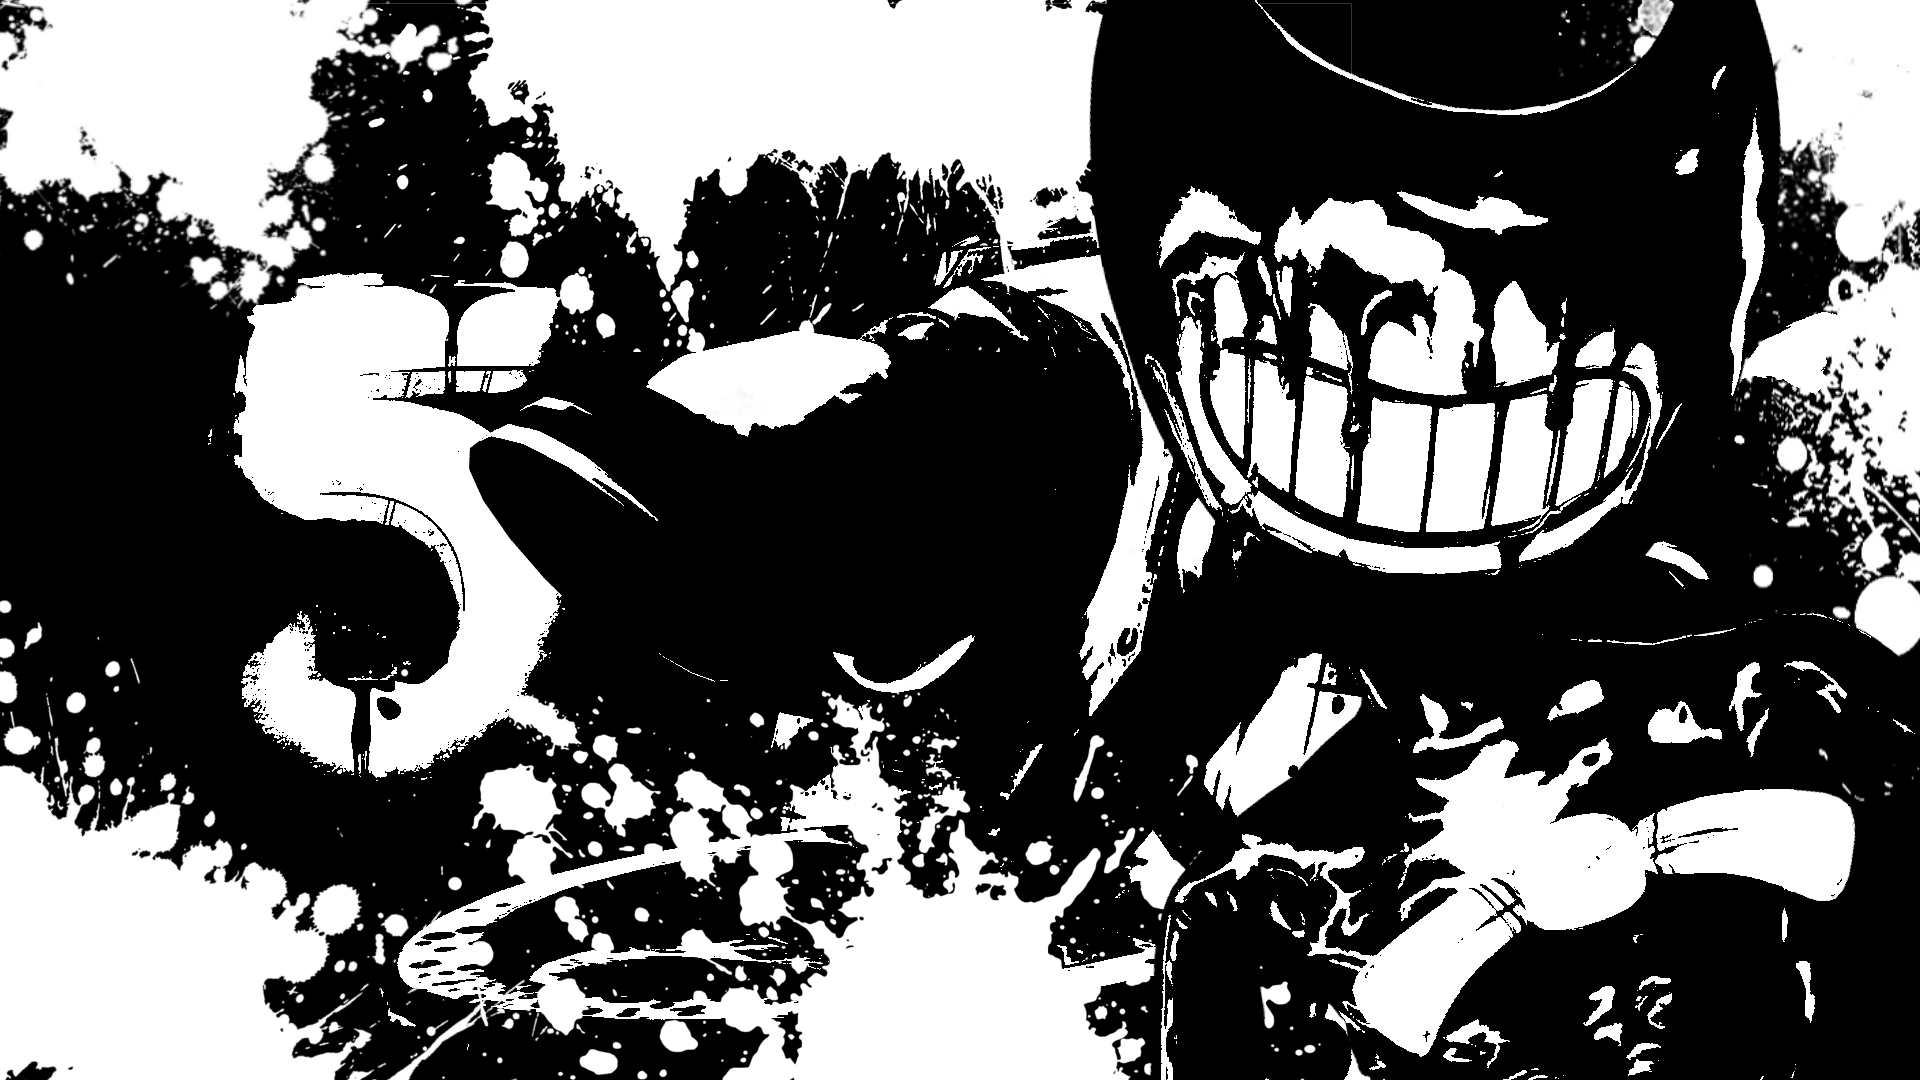 Here is a Bendy Chapter Five Wallpaper that I made